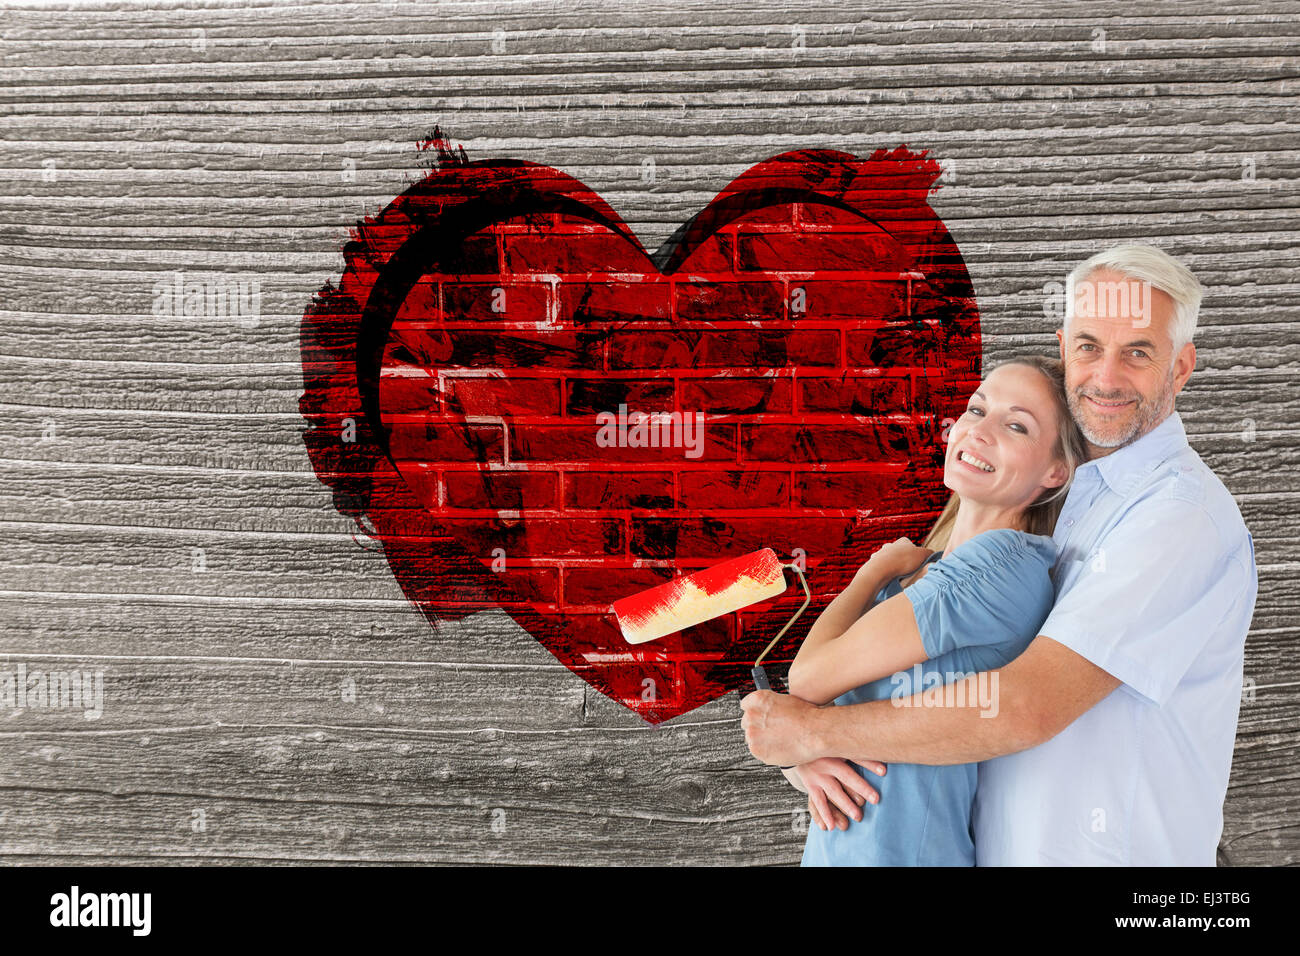 Composite image of happy couple hugging and holding paint roller Stock Photo